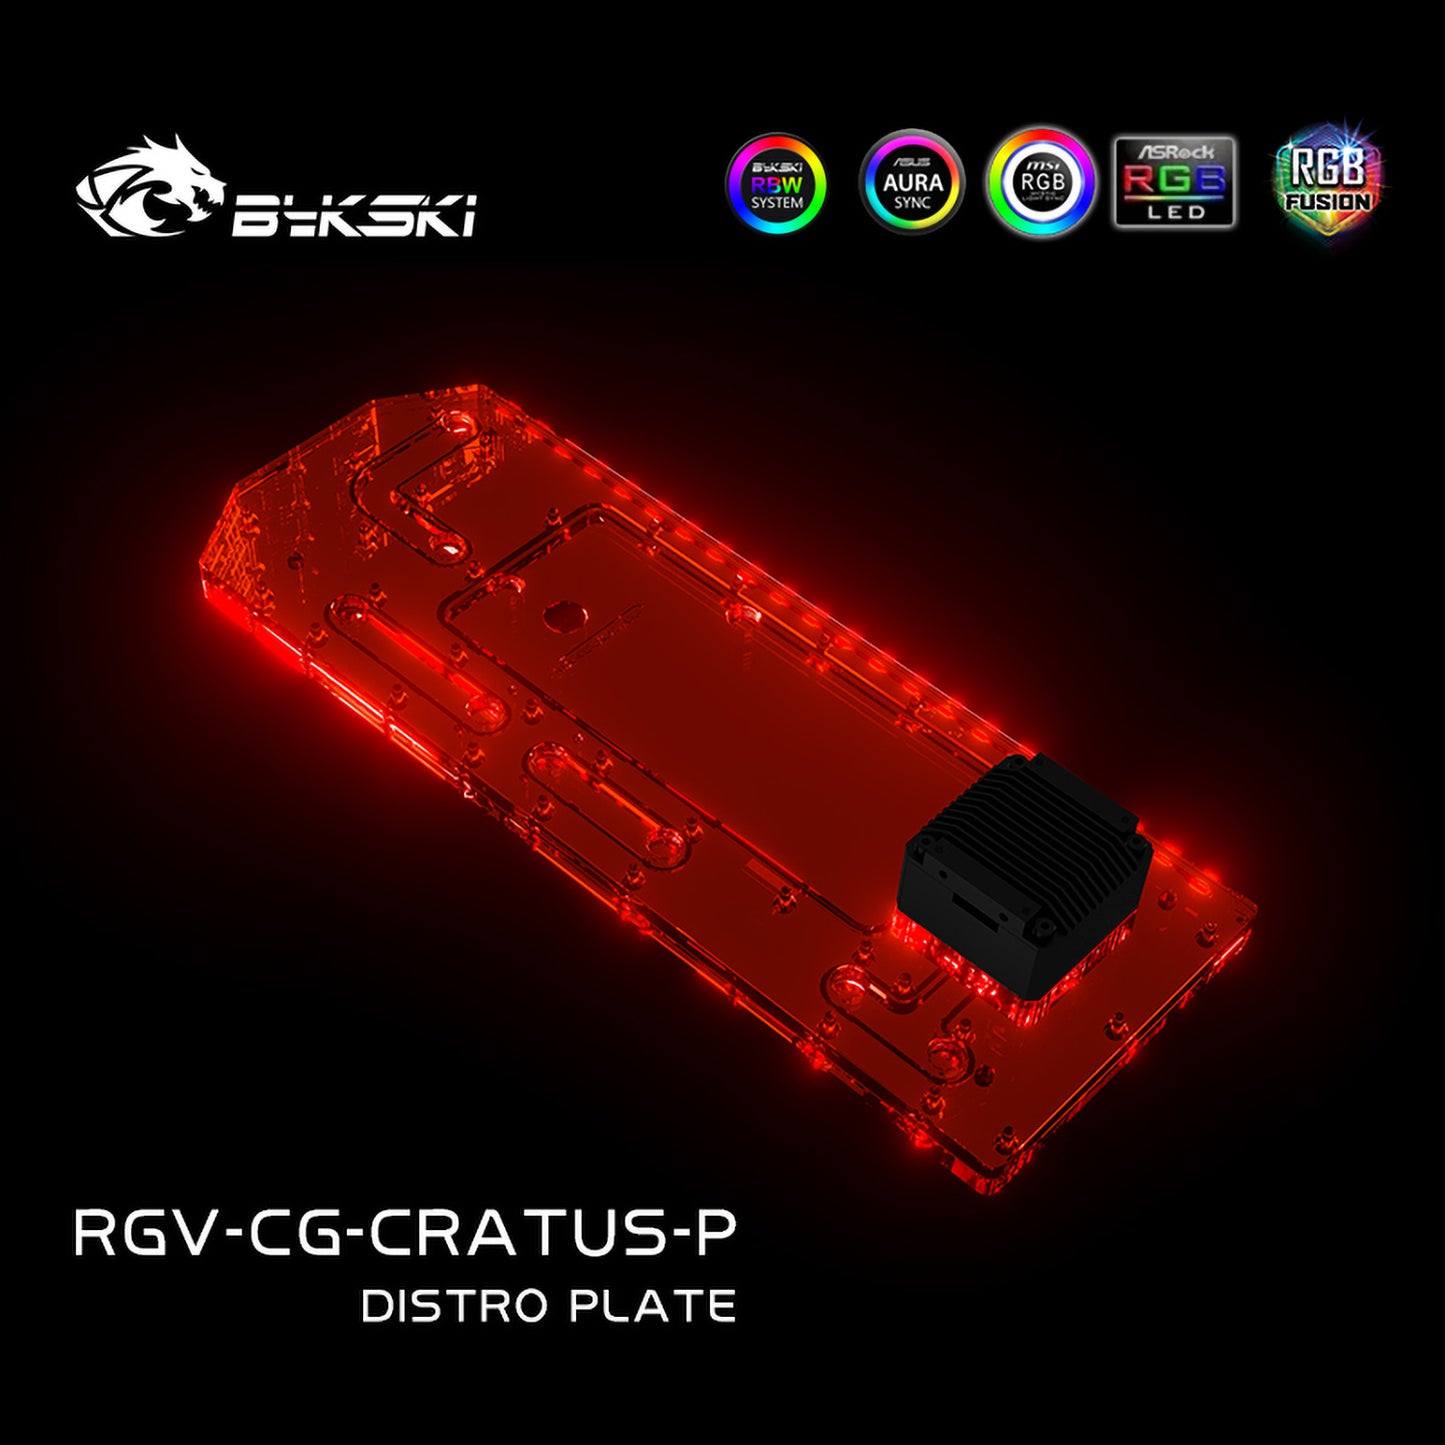 Bykski Distro Plate Kit For Cougar Cratus Case, 5V A-RGB Complete Loop For Single GPU PC Building, Water Cooling Waterway Board, RGV-CG-CRATUS-P